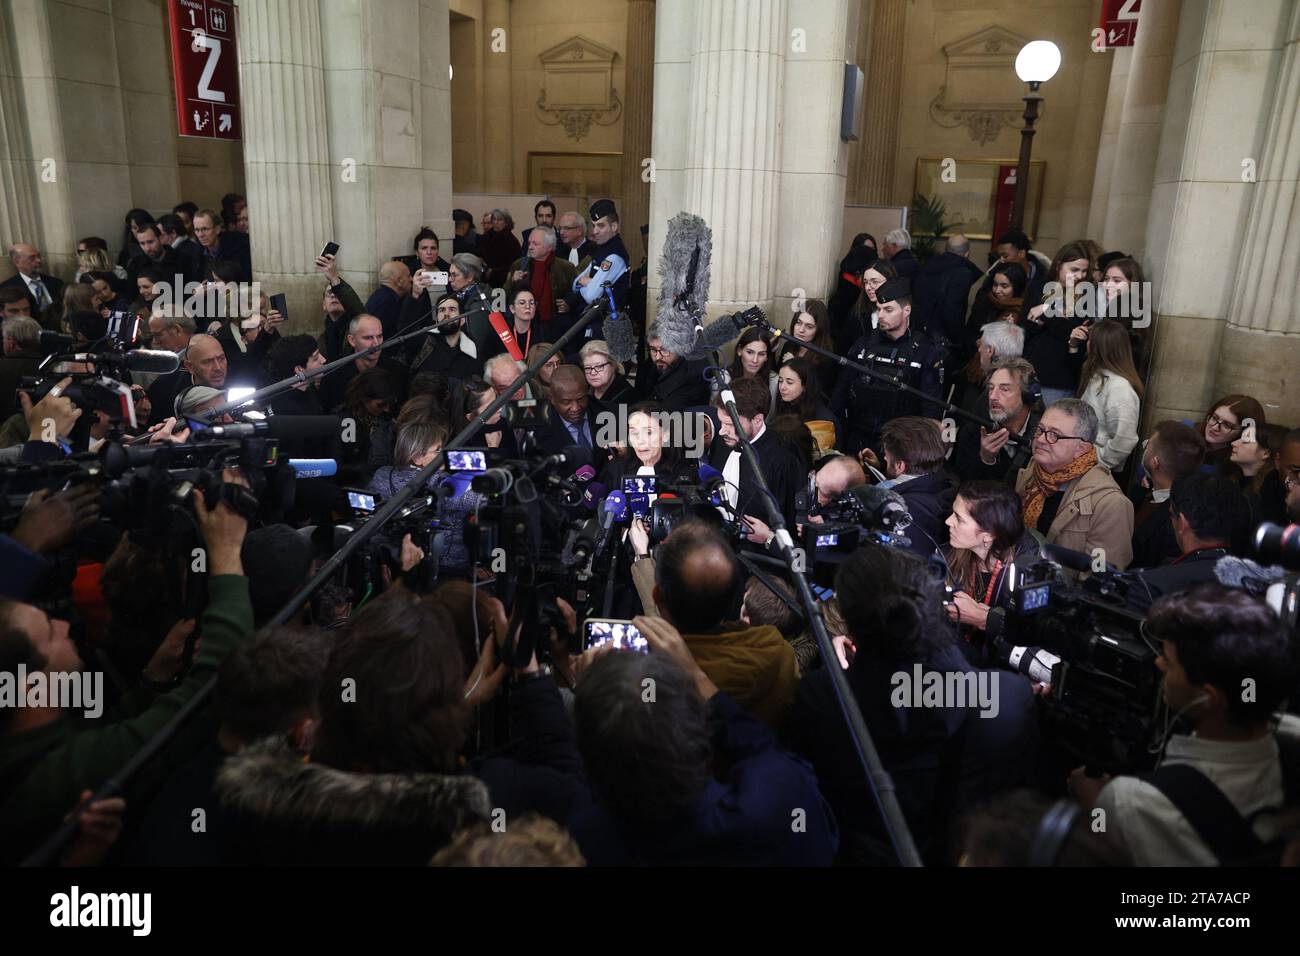 French Justice Minister's lawyers Jacqueline Laffont and Remi Lorrain address the press after the court's verdict at Paris' courthouse for the last day of the Minister's trial over alleged conflicts of interest and abuse of office, in Paris, on November 29, 2023. A French court on November 29, 2023, acquitted France's justice minister in a conflict of interest trial that has been an embarrassment for French President's government. Eric Dupond-Moretti, a pugnacious former star defence lawyer, had in 2021 been charged with misusing his position to settle scores with opponents from his legal care Stock Photo